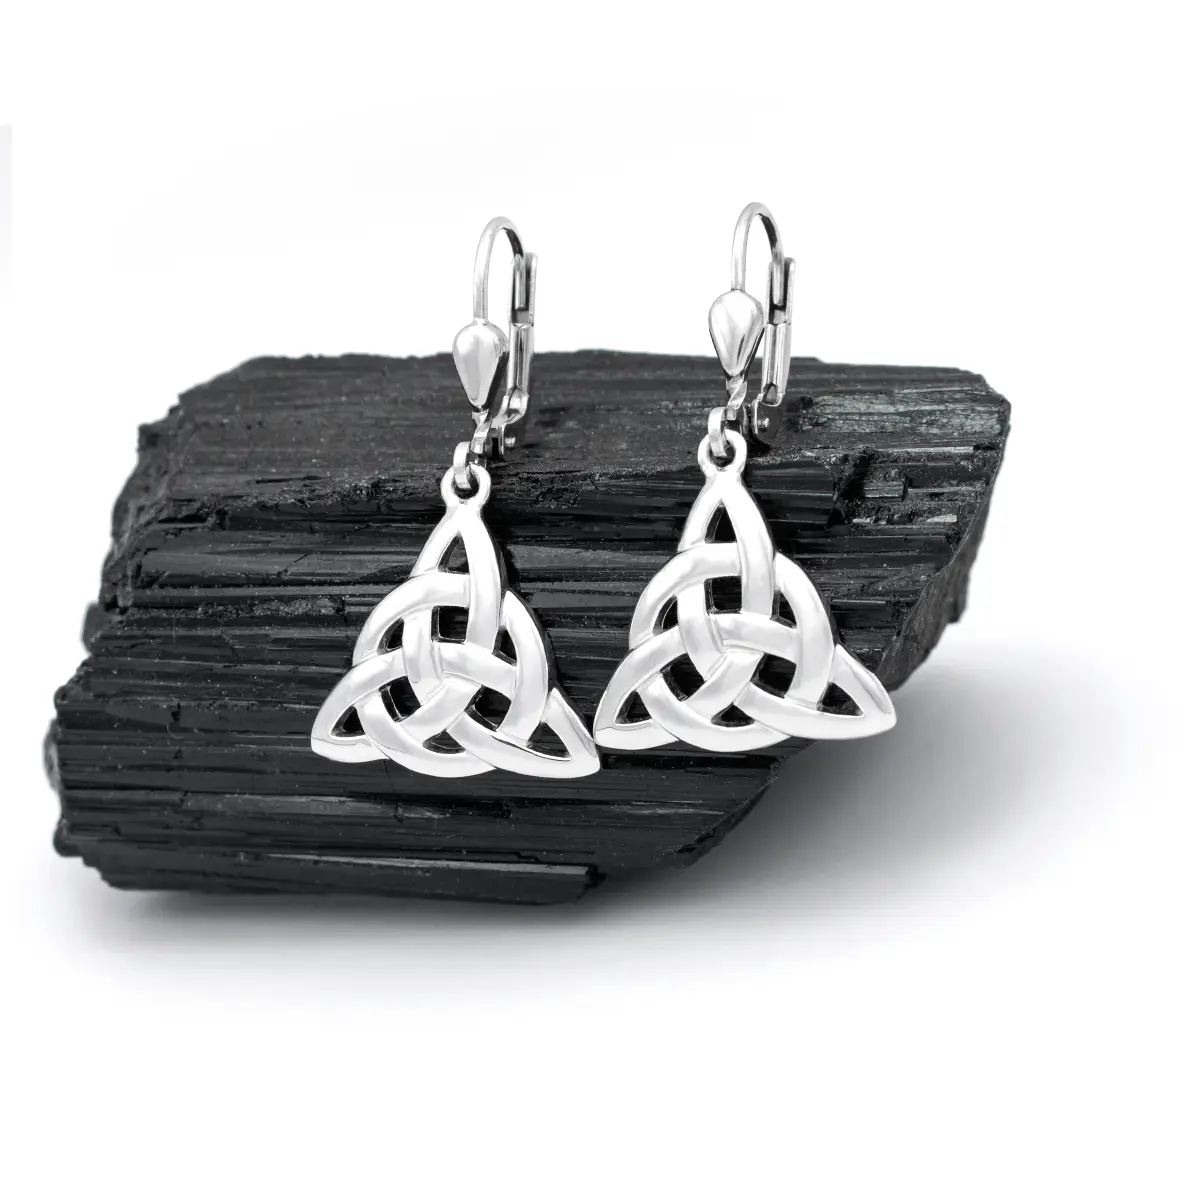 What Exactly Is “Celtic” Jewelry? - Shamrock Gift